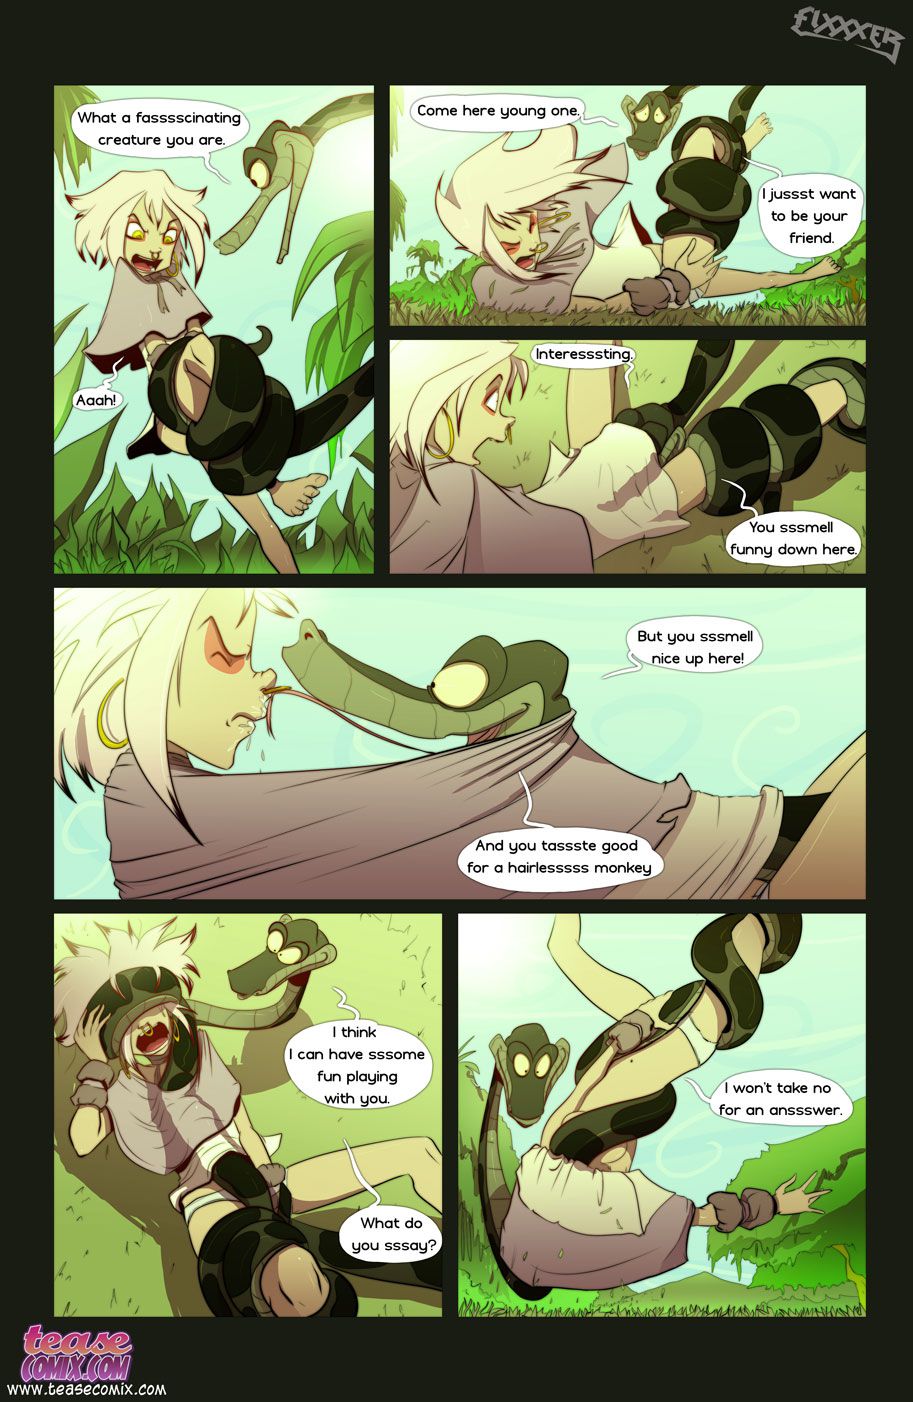 Serpent Porn Comics - Of The Snake And The Girl [Tease Comix] - 1 . Of The Snake And The Girl -  Chapter 1 [Tease Comix] - AllPornComic